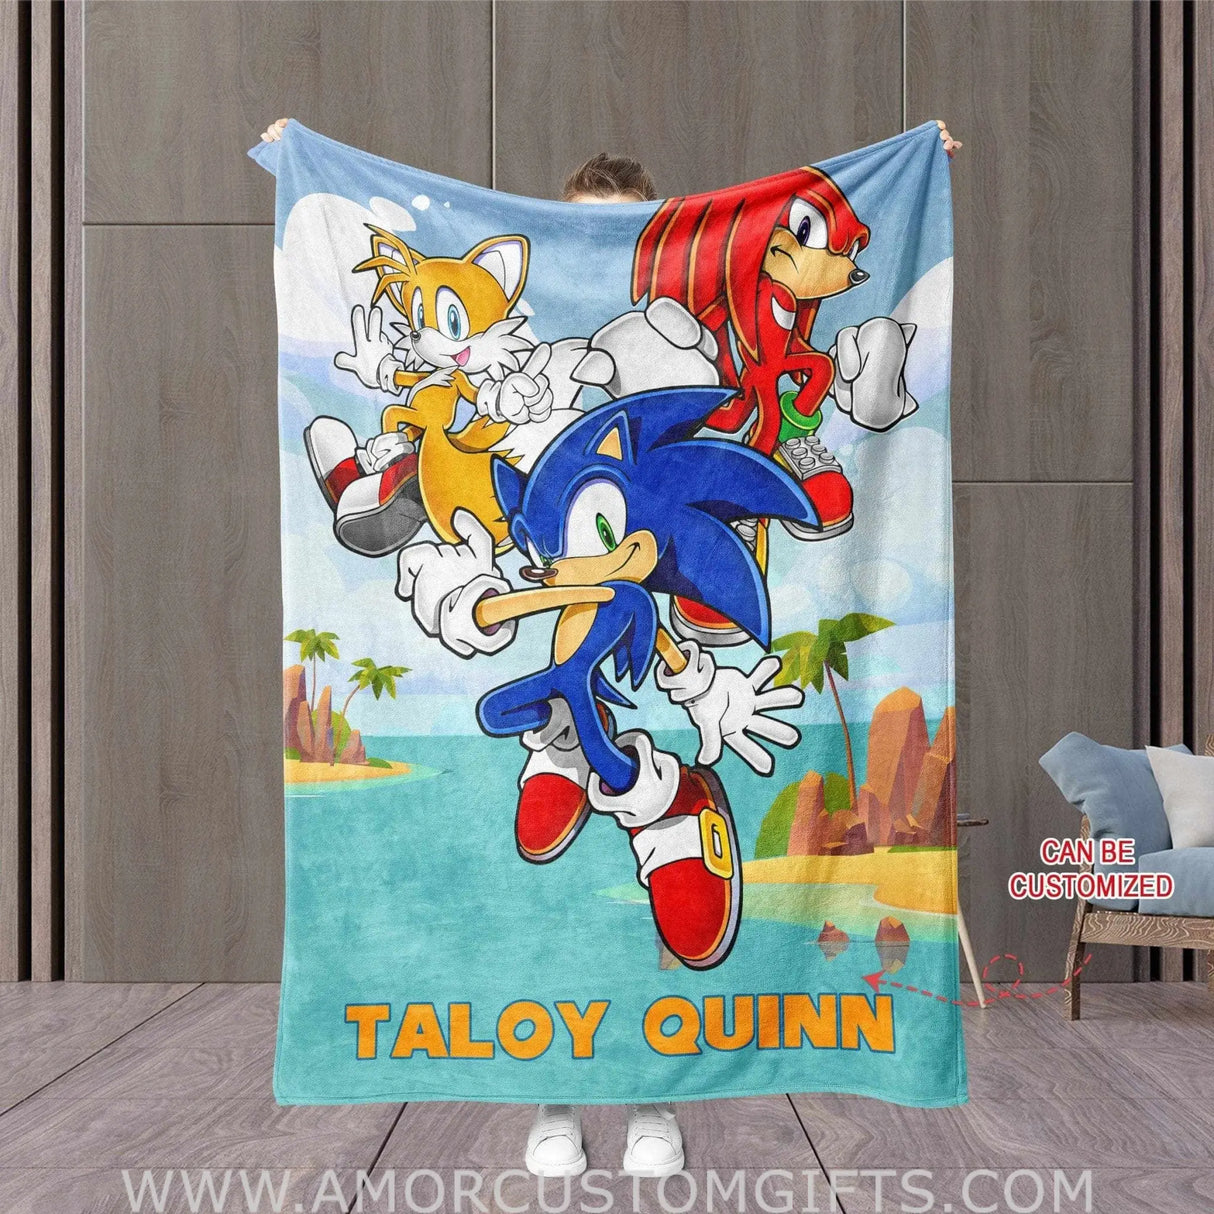 Blankets Personalized Sonic The Hedgehog Blanket